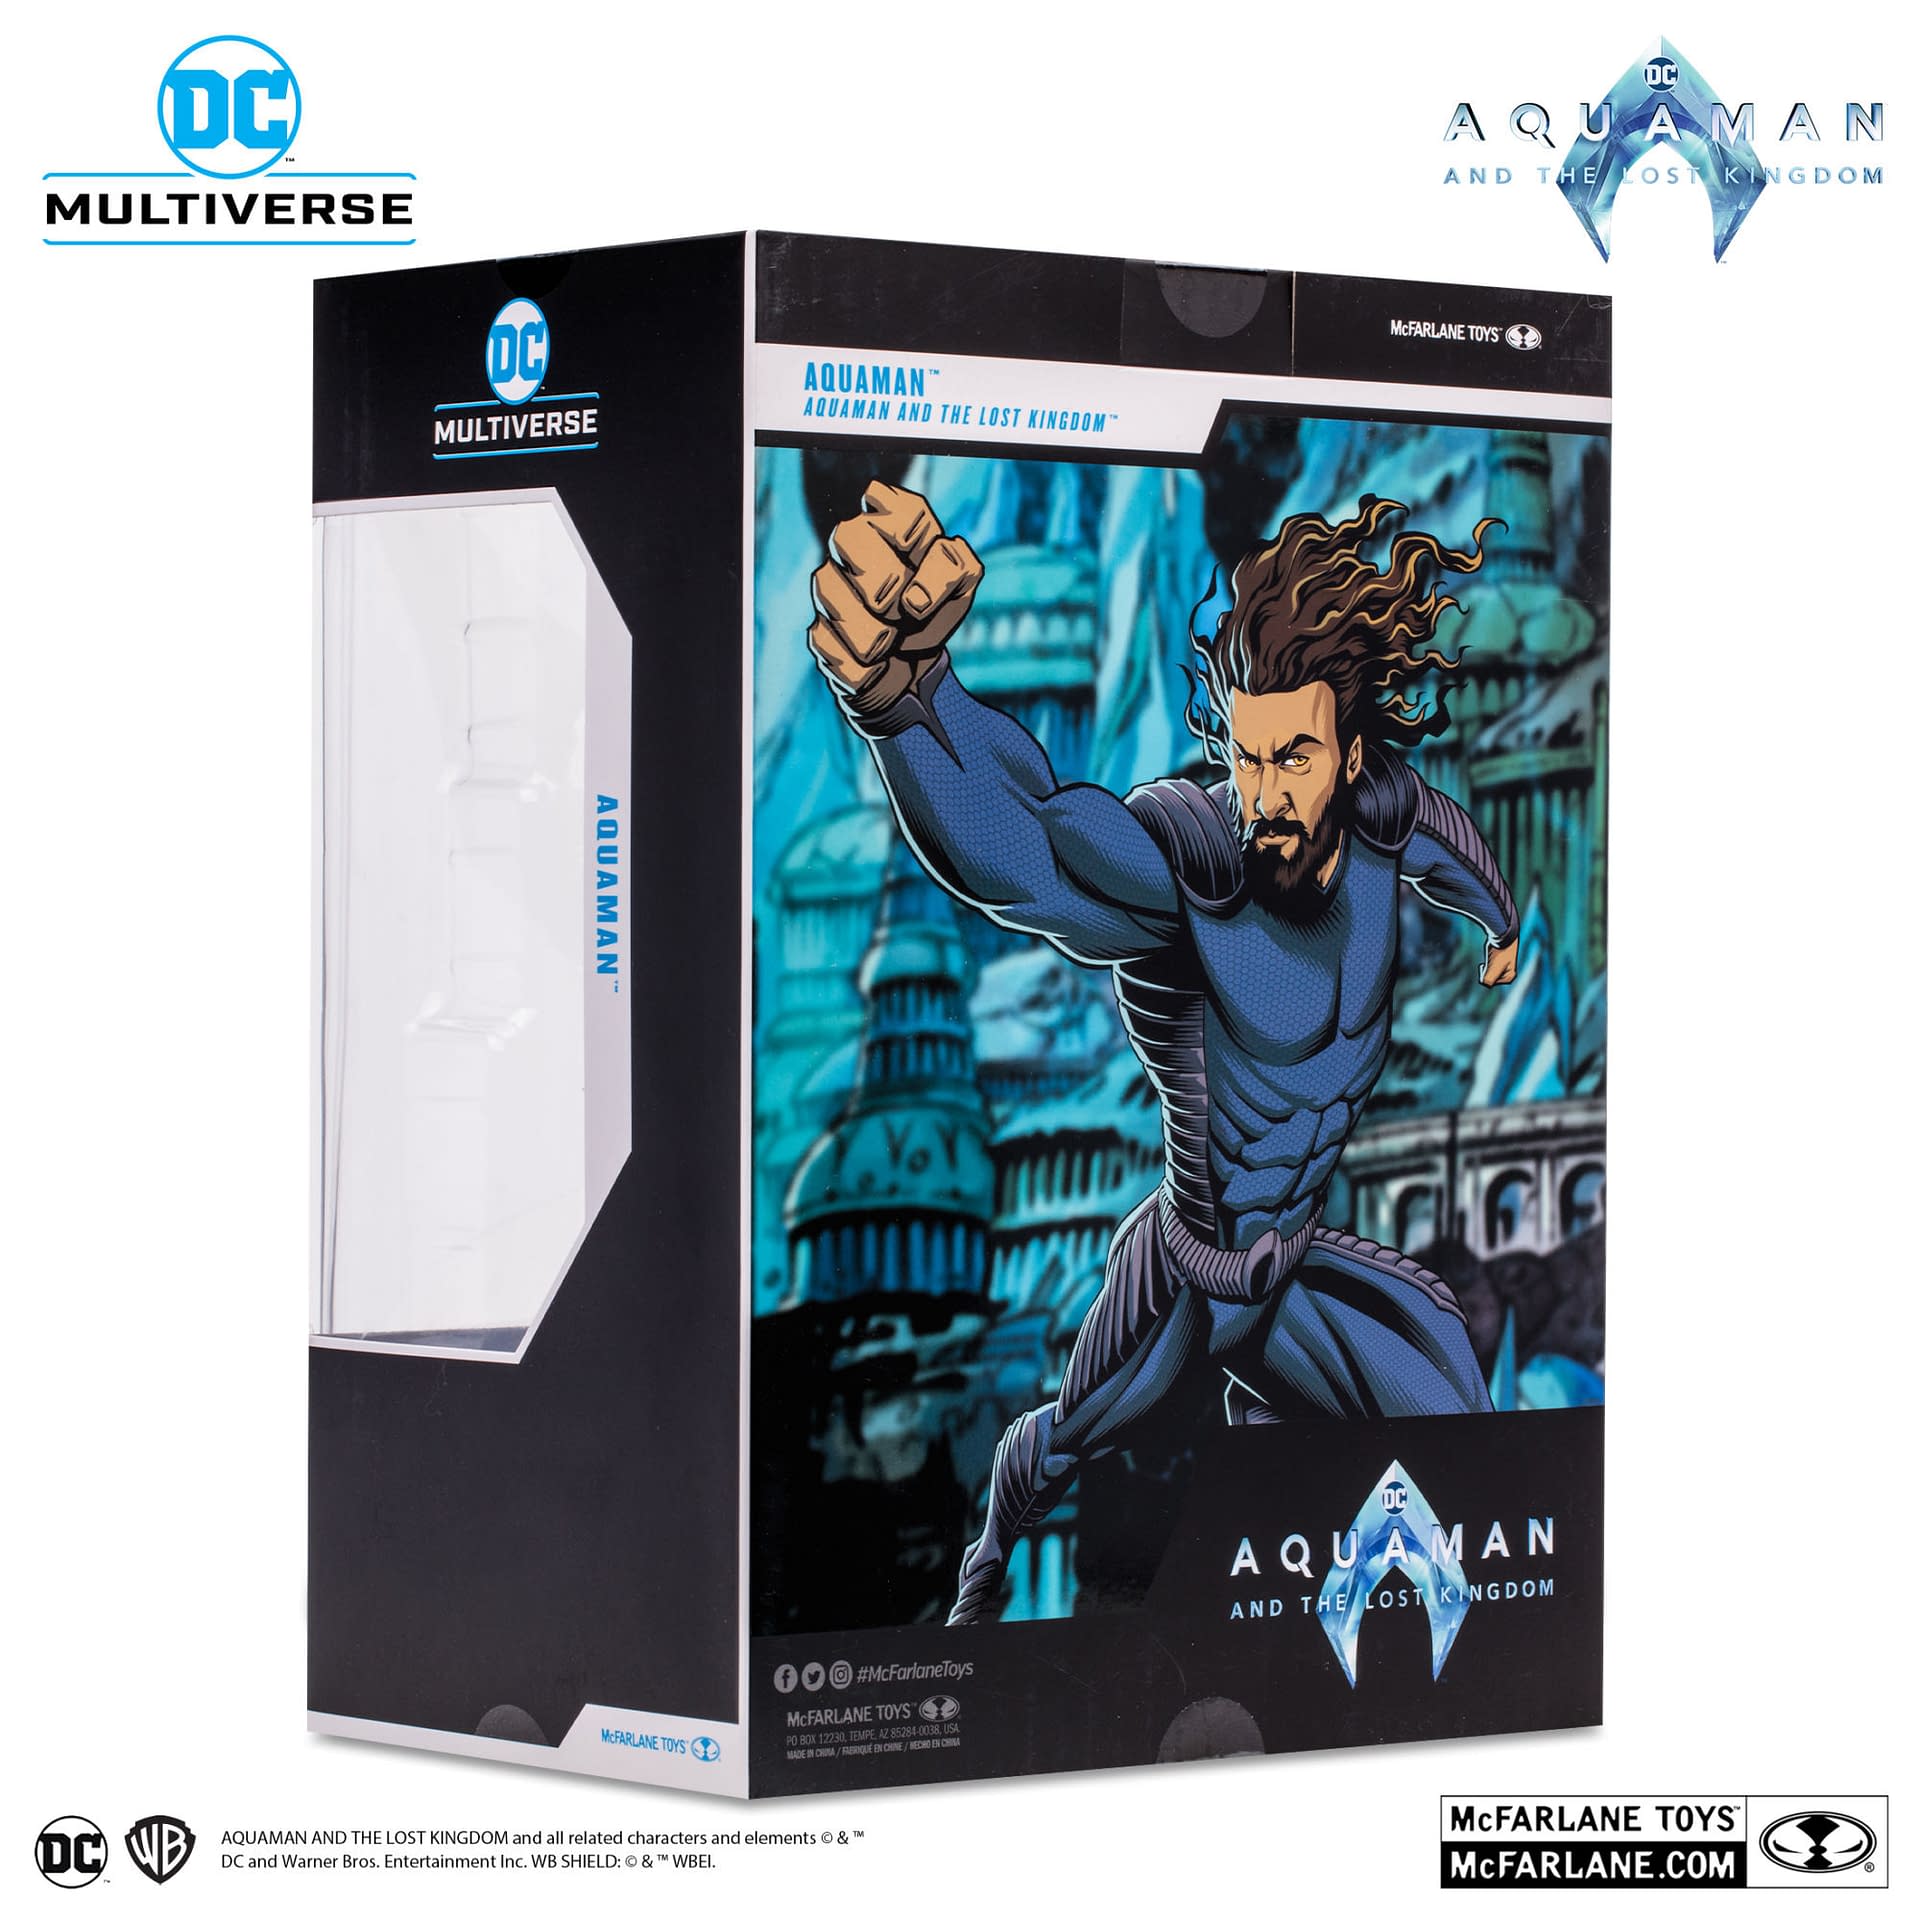 New Aquaman and the Lost Kingdom Figures Arrive from McFaralane Toys 